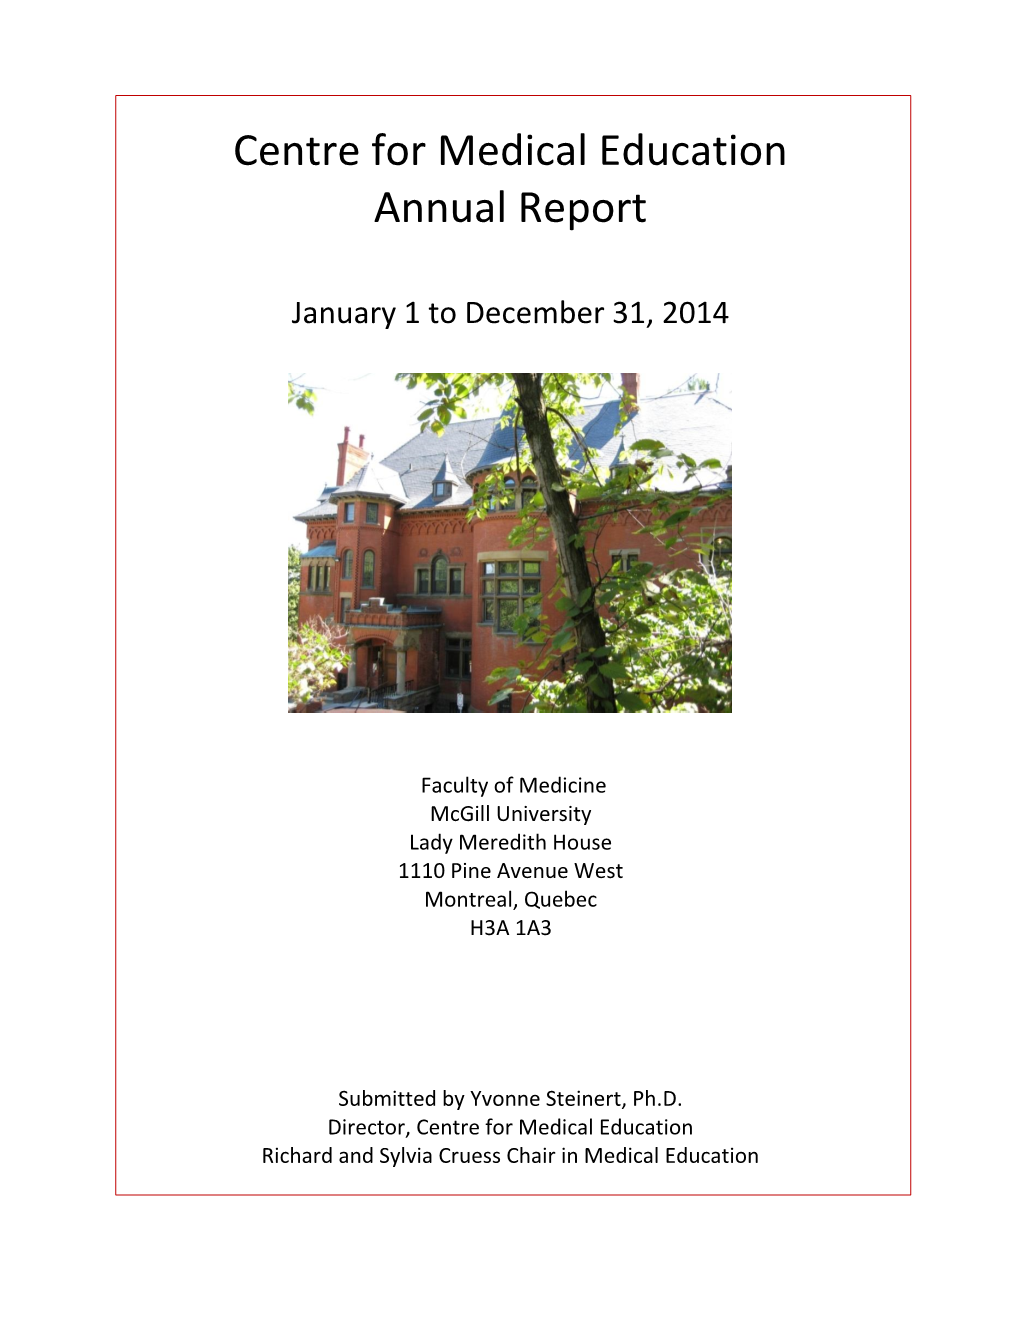 Centre for Medical Education Annual Report